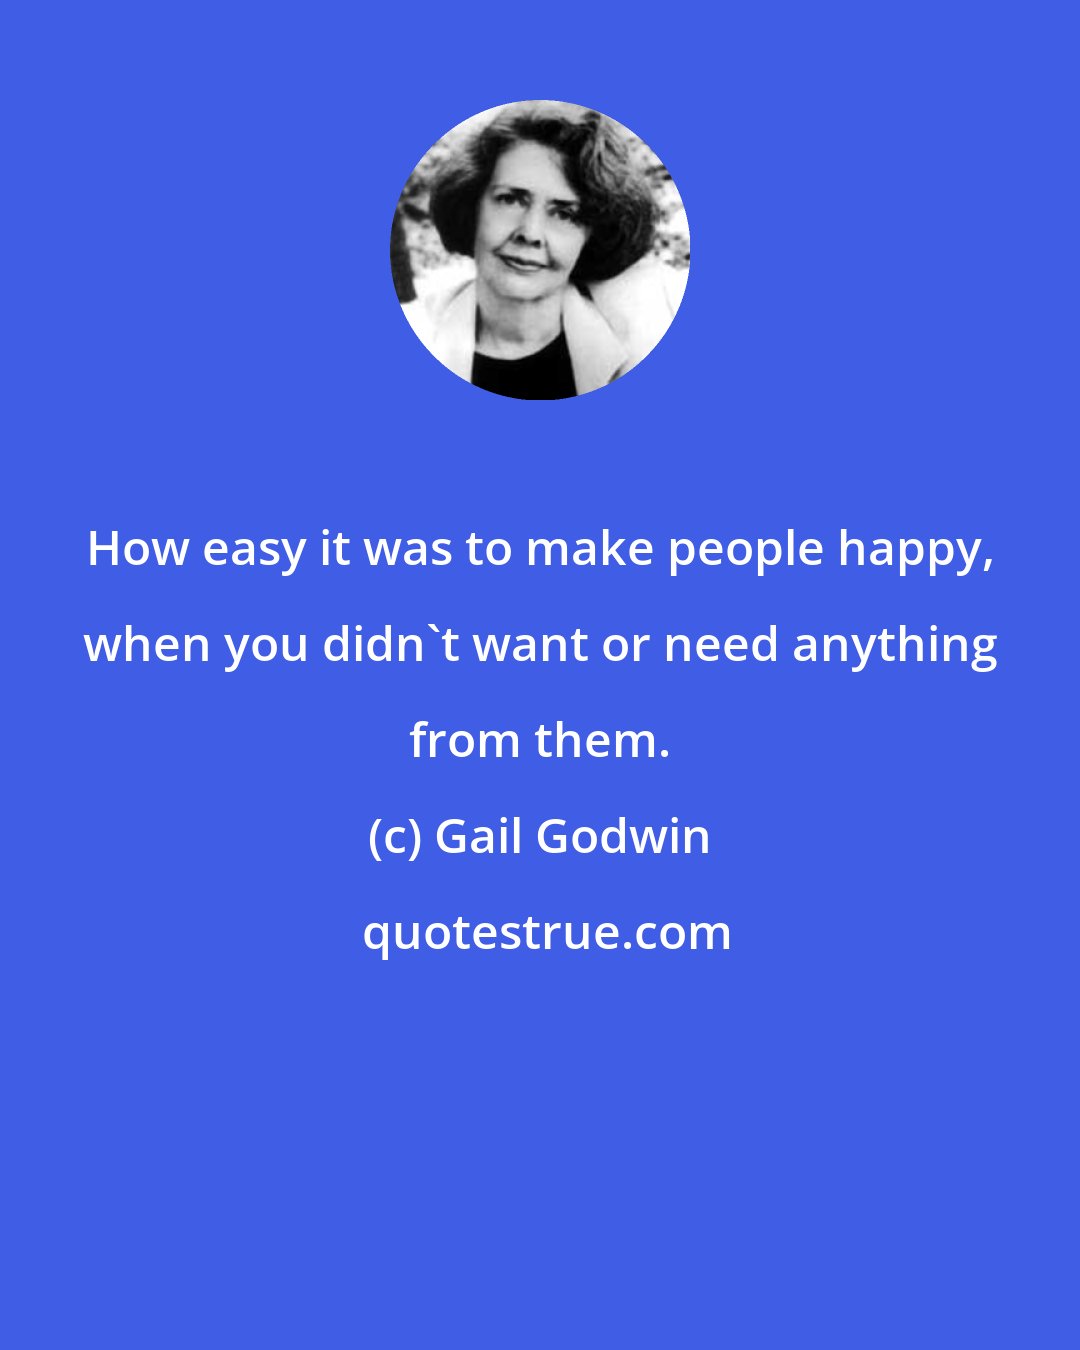 Gail Godwin: How easy it was to make people happy, when you didn't want or need anything from them.